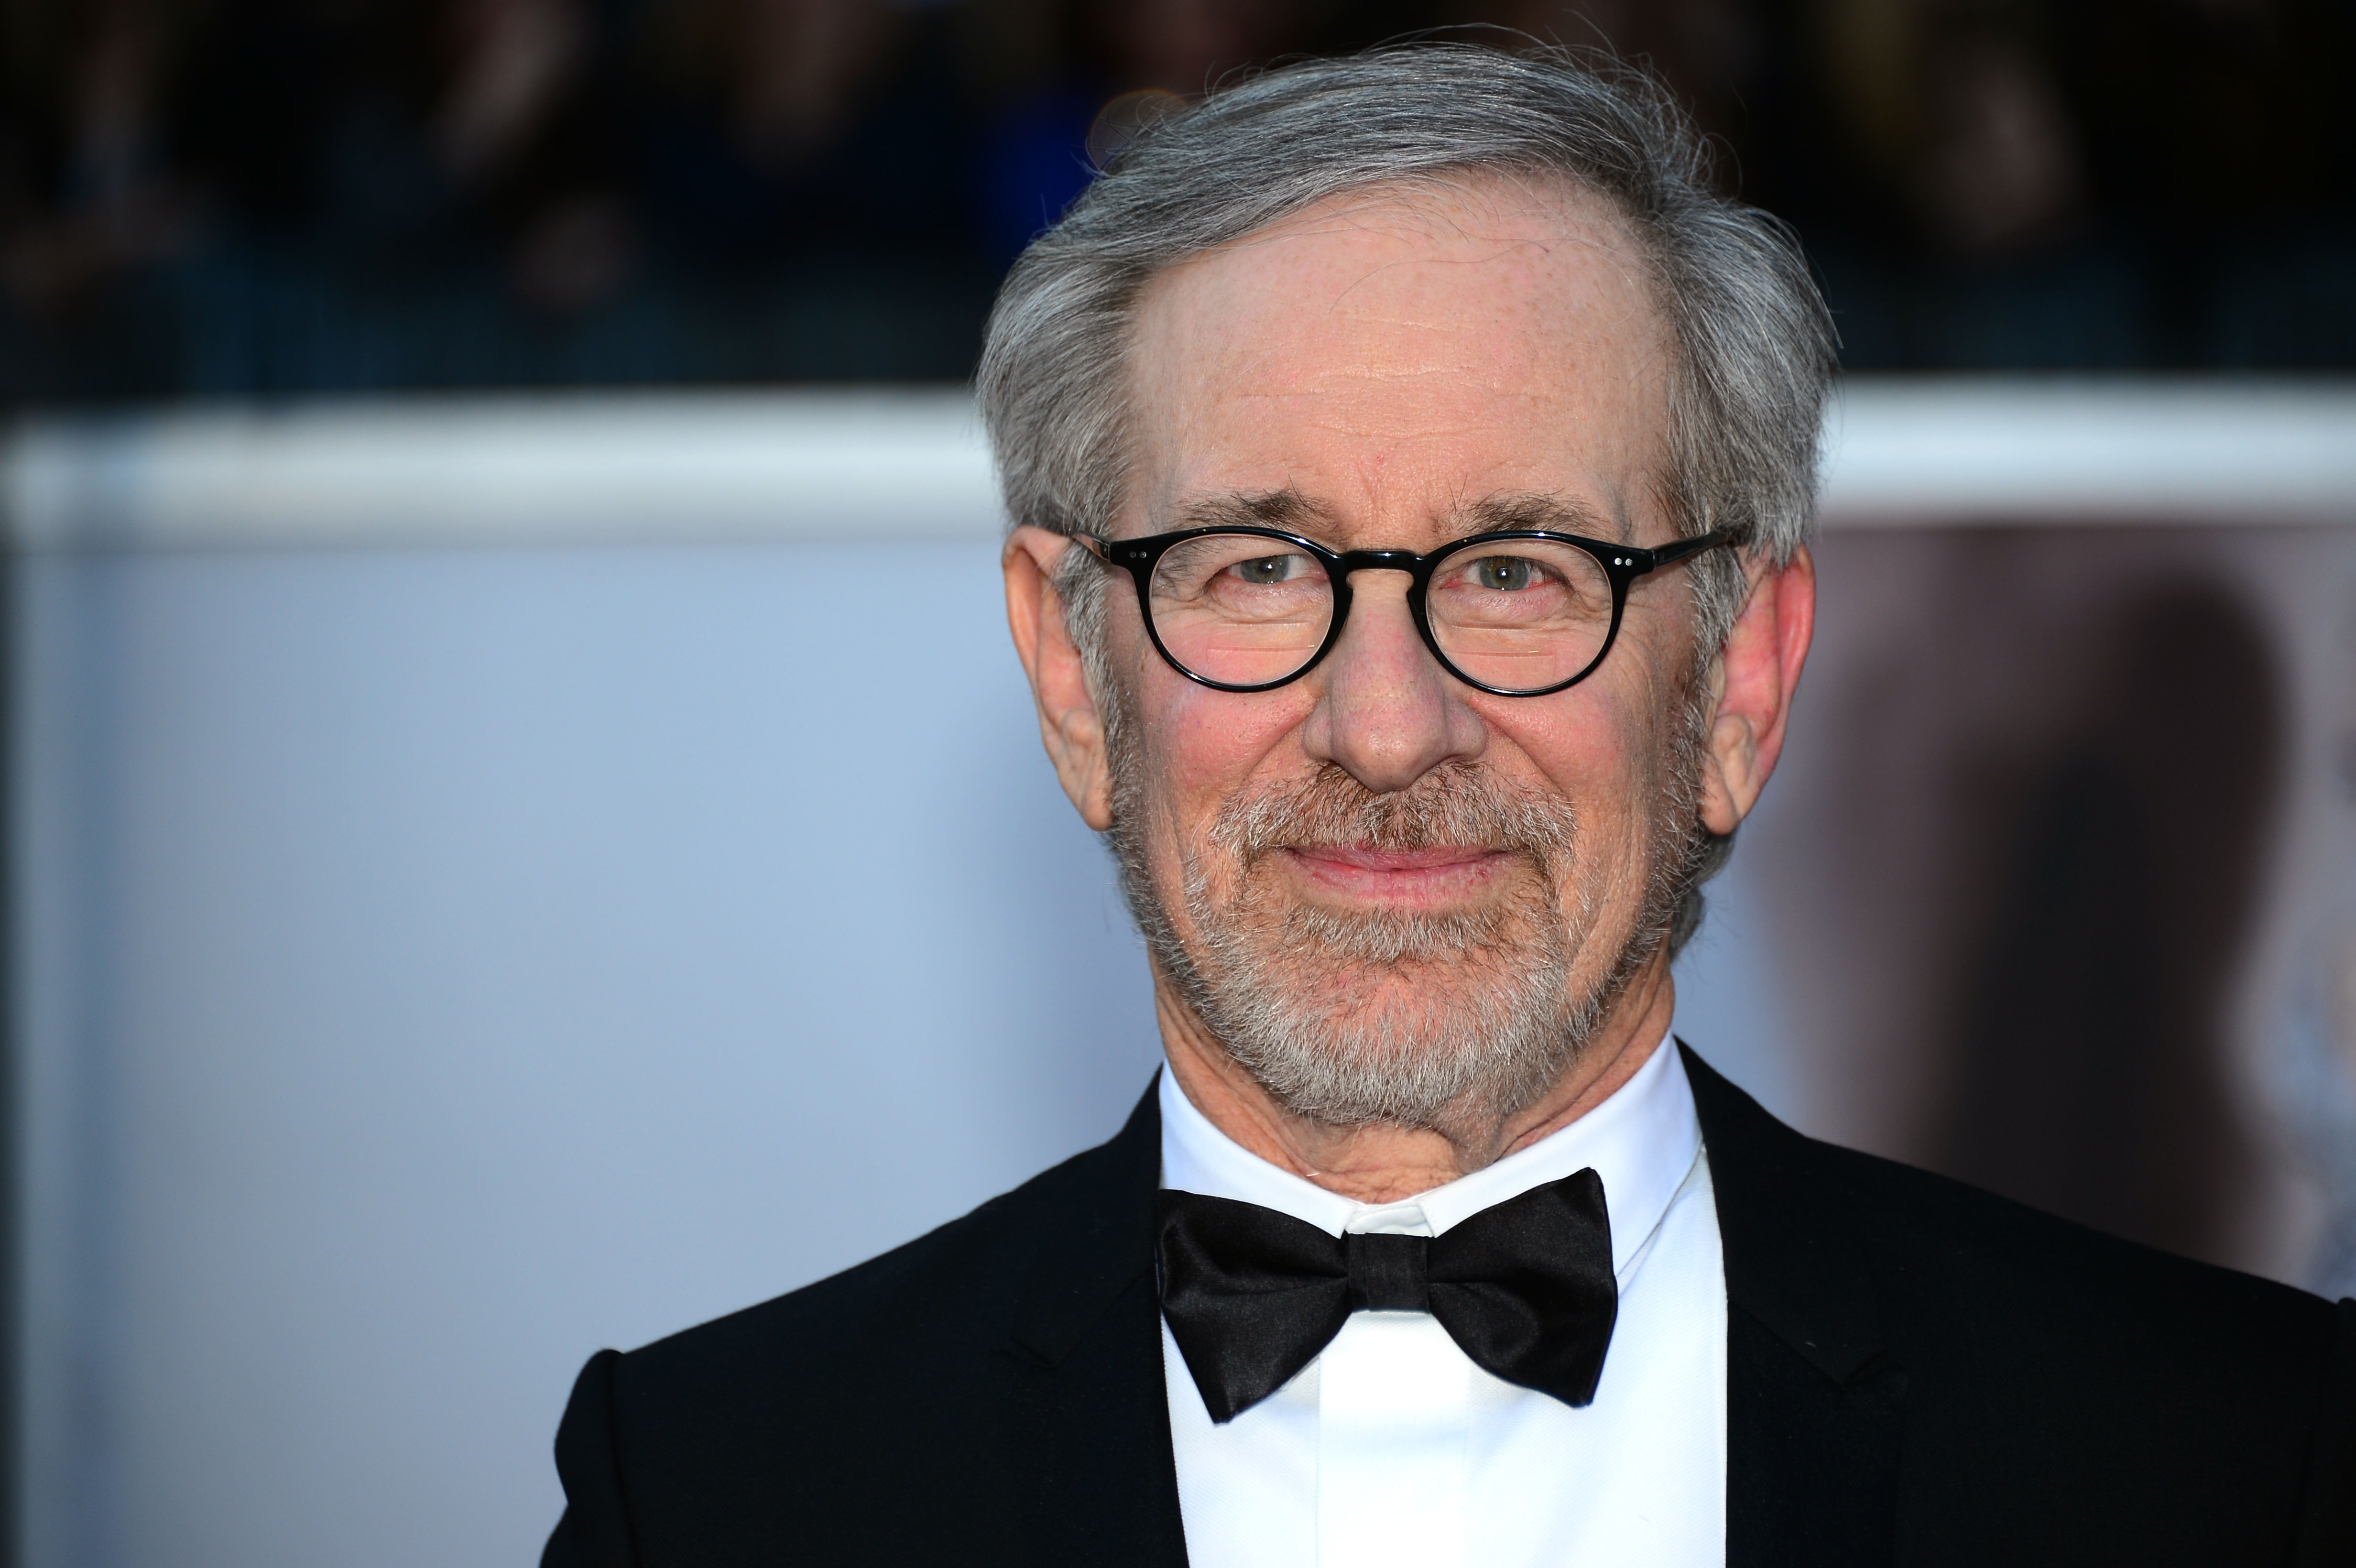 Best Director nominee Steven Spielberg arrives on the red carpet for the 85th Annual Academy Awards on February 24, 2013 in Hollywood, California. AFP PHOTO/FREDERIC J. BROWN (Photo credit should read FREDERIC J. BROWN/AFP/Getty Images)